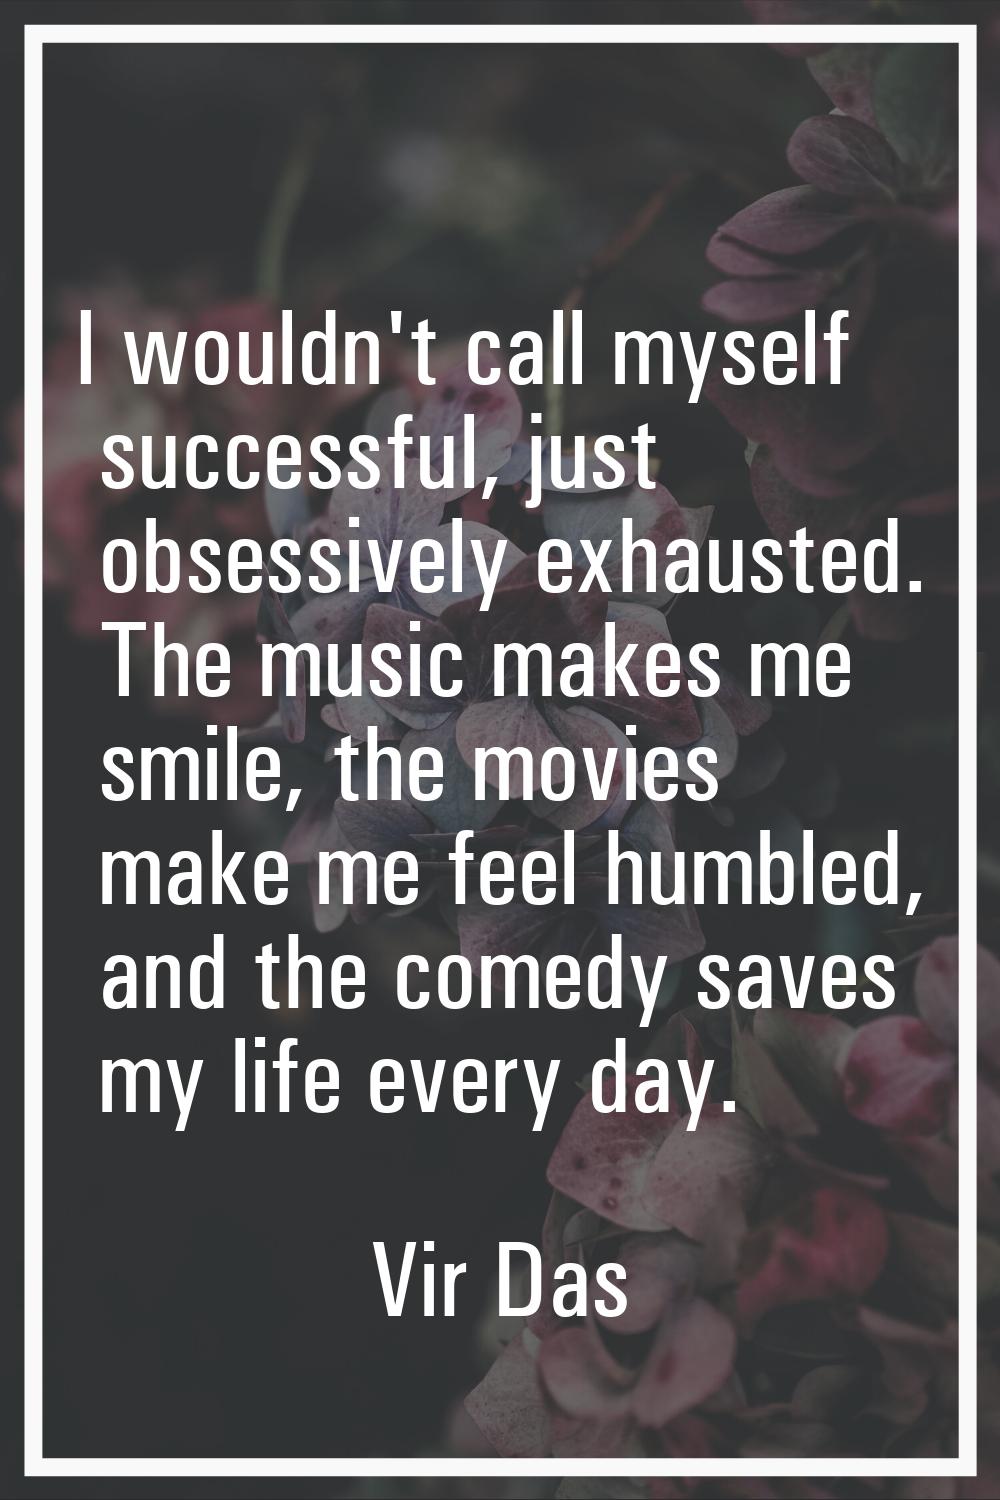 I wouldn't call myself successful, just obsessively exhausted. The music makes me smile, the movies